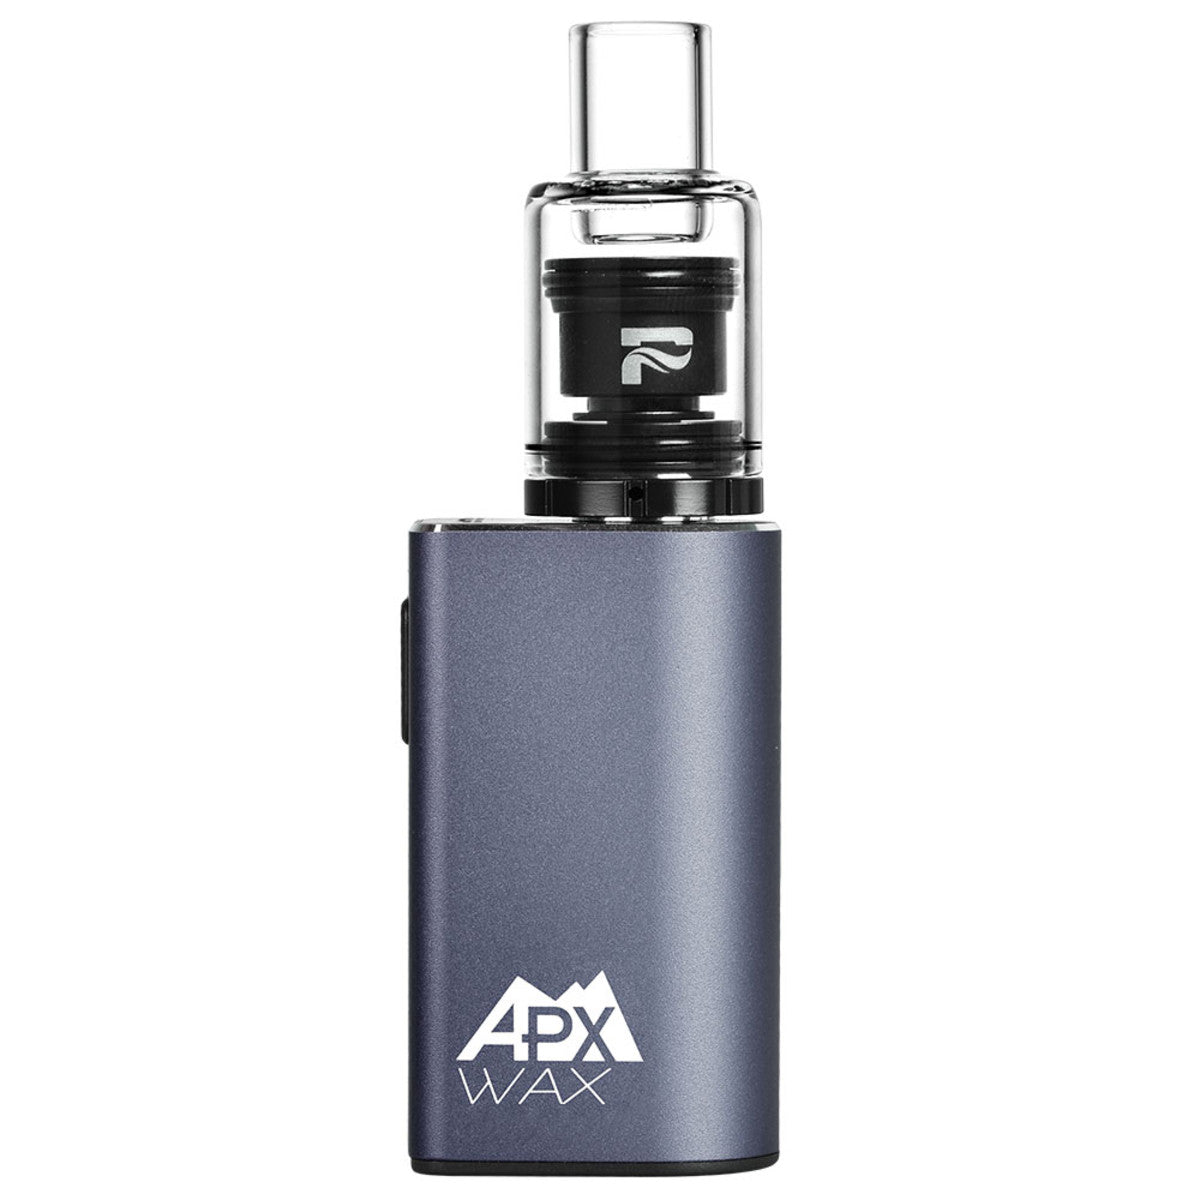 pulsar apx wax v3 concentrate vaporizer cold silver